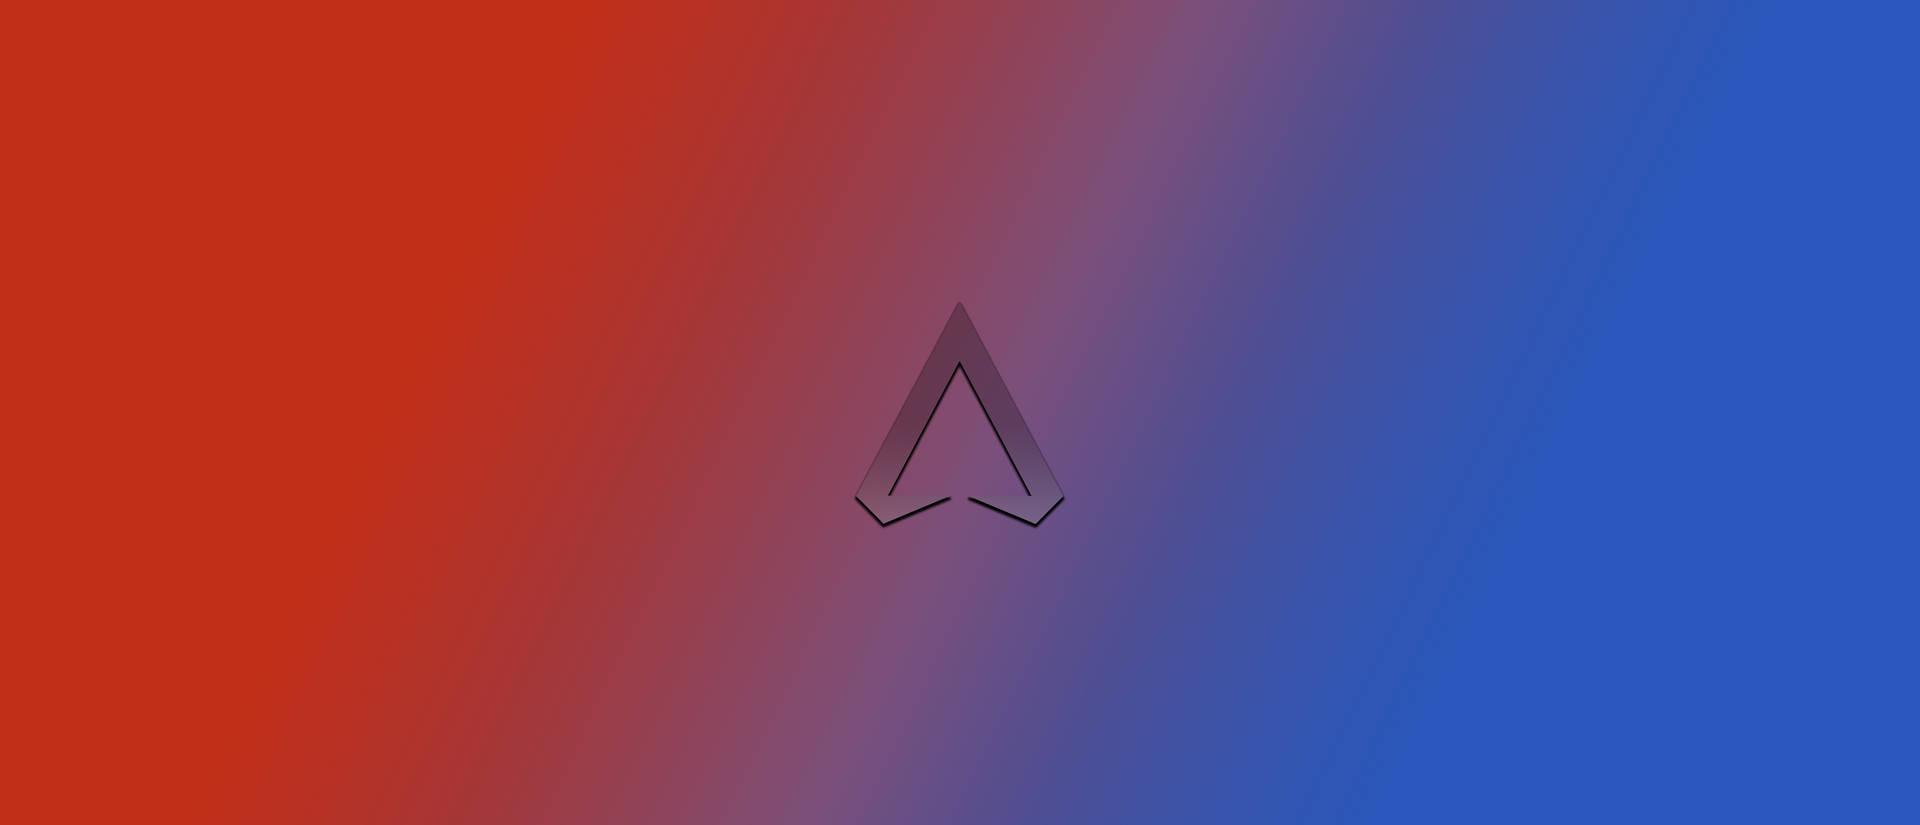 Iconic Apex Legends Logo For Iphone Background